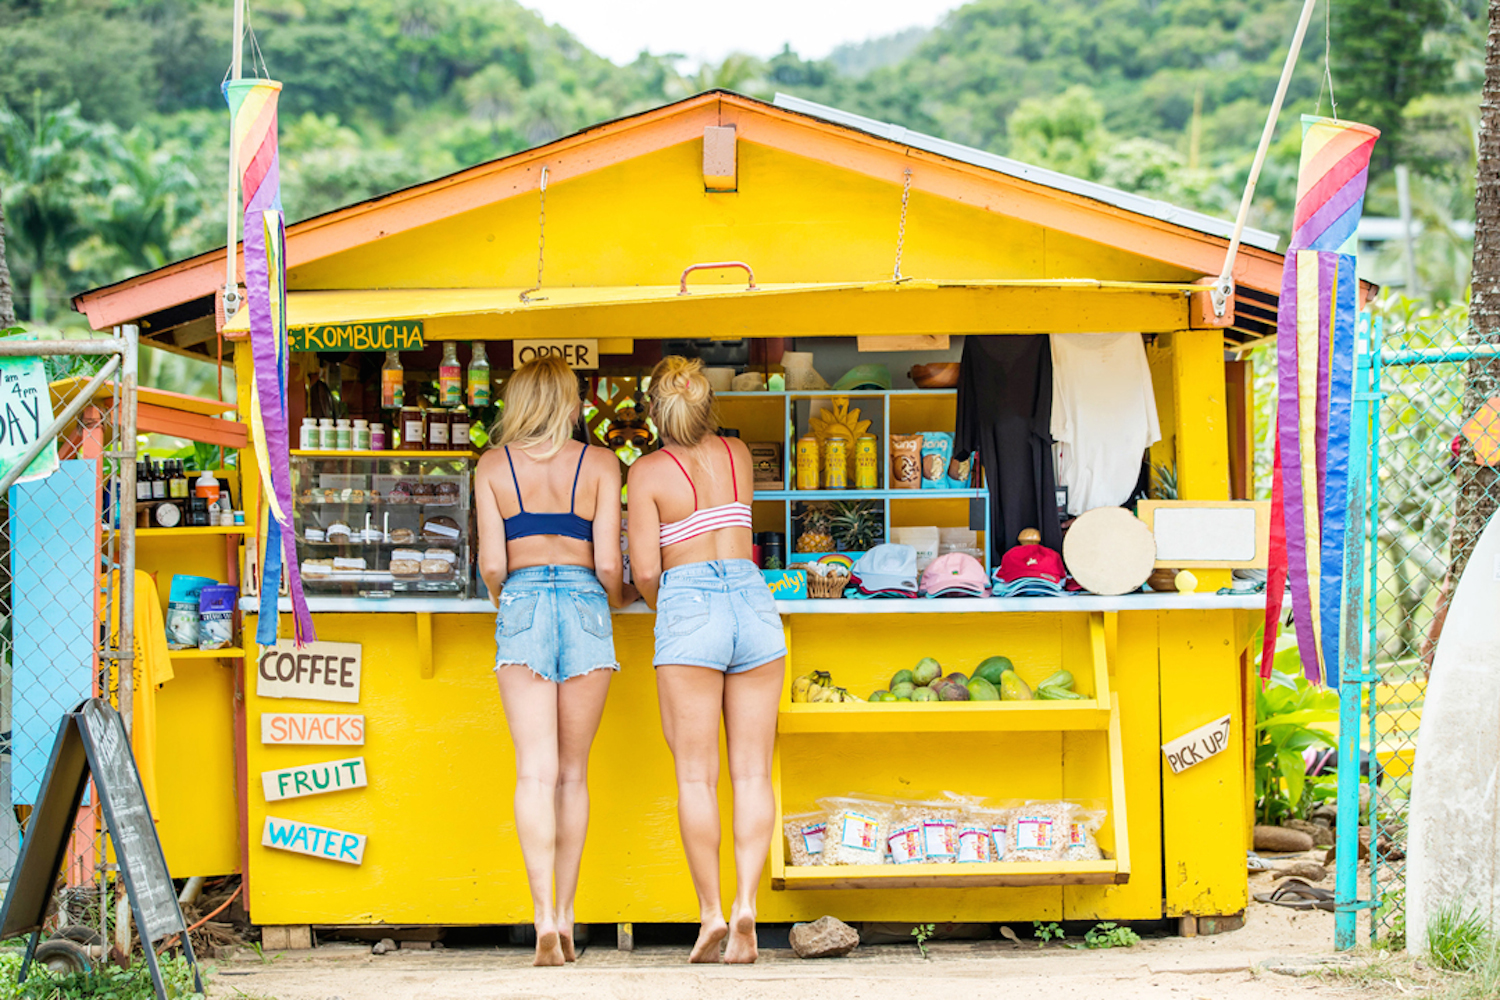 surfer girls by a bright yellow surf shack